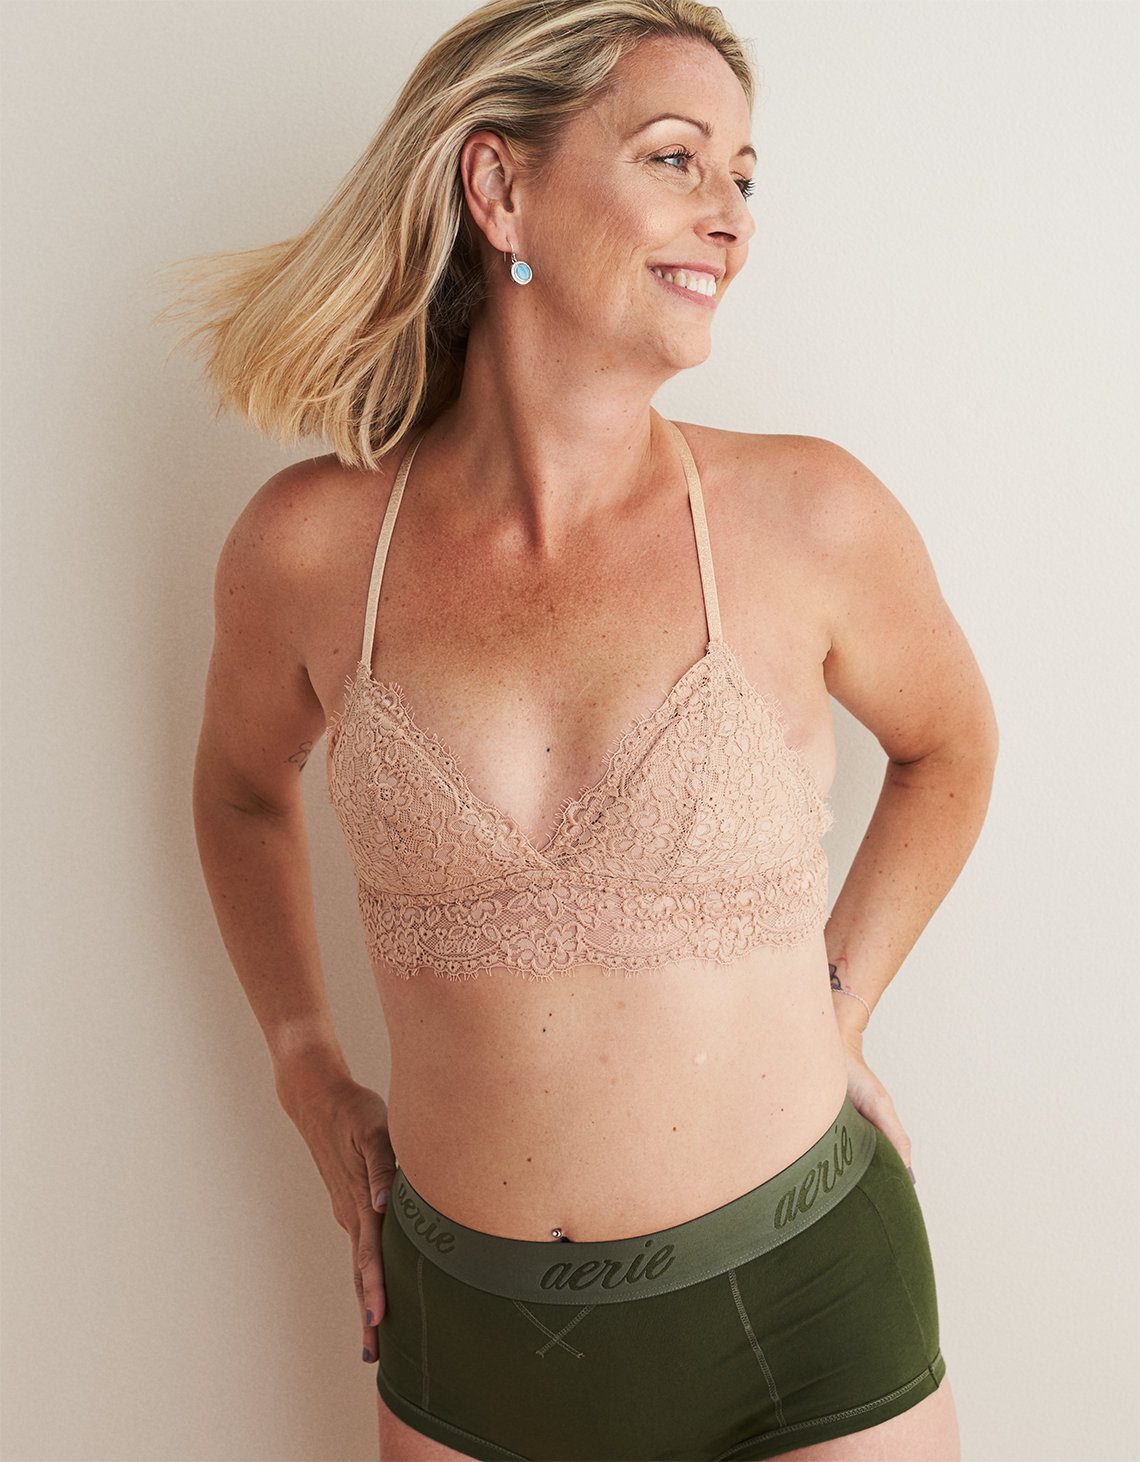 https://estylingerie.com/wp-content/uploads/2018/07/aerie-romantic-lace-padded-bralette-models-with-disabilities-and-illnesses-campaign.jpg